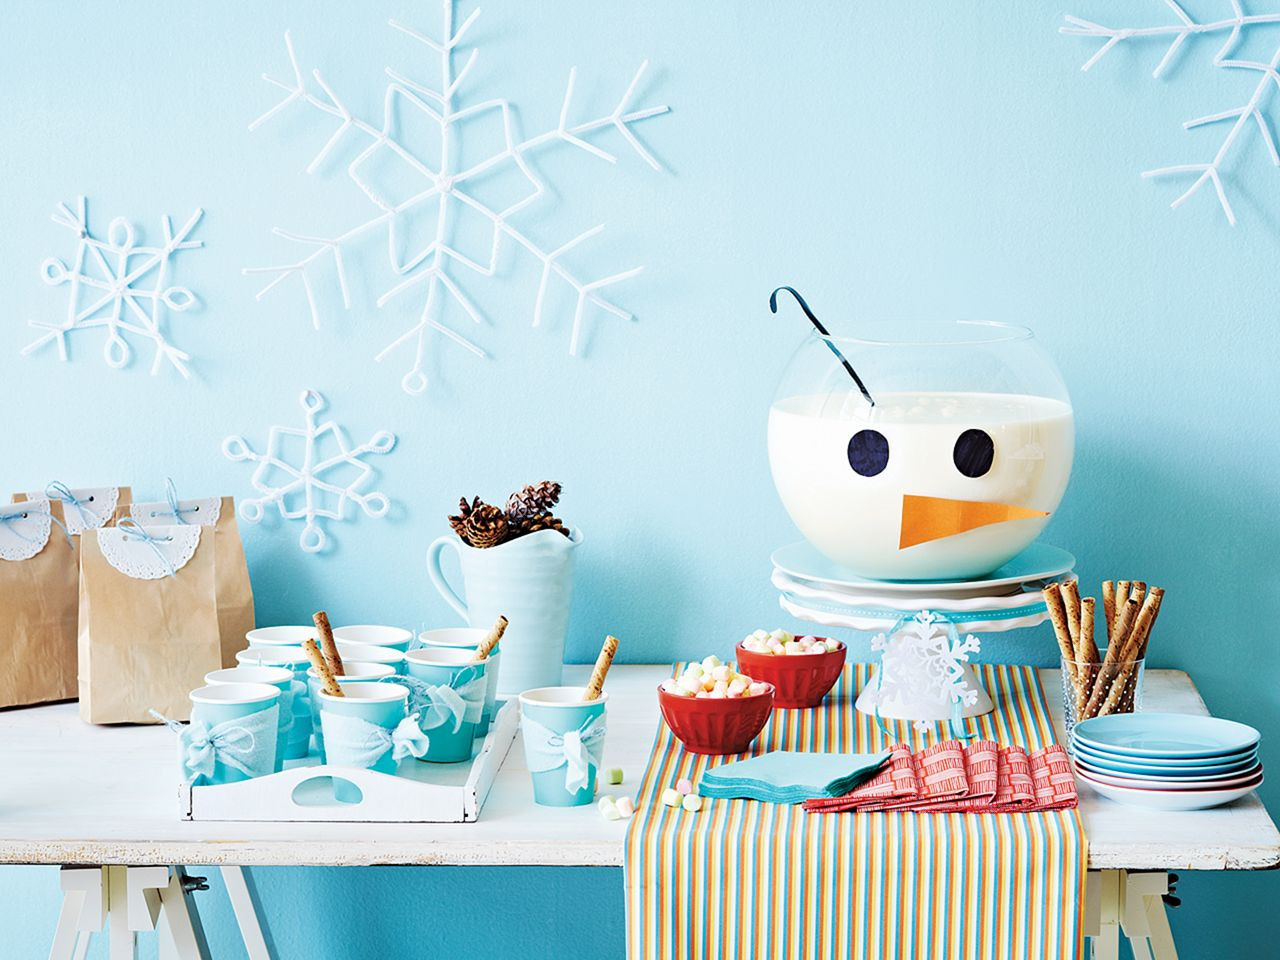 22-best-ideas-teenage-birthday-party-ideas-in-winter-home-family